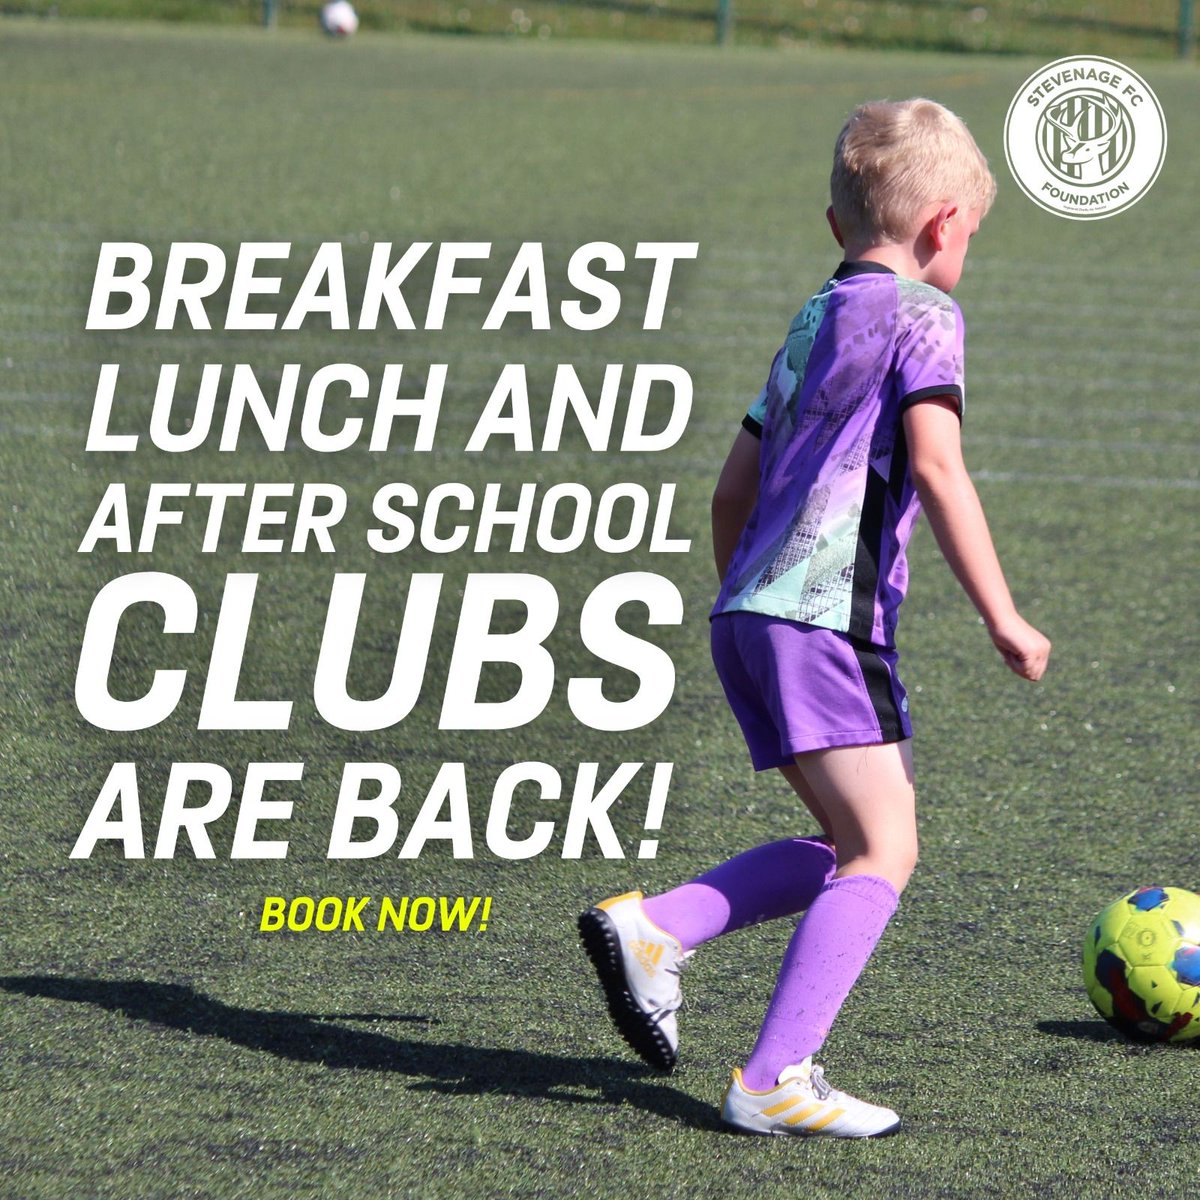 Our school sessions are back! 🕺 Book now to secure your place this summer term!🥳 🔗- buff.ly/3HCjAPu #extracurricular #school #stevenagefc #stevenagefcf #stevenagefcfoundation